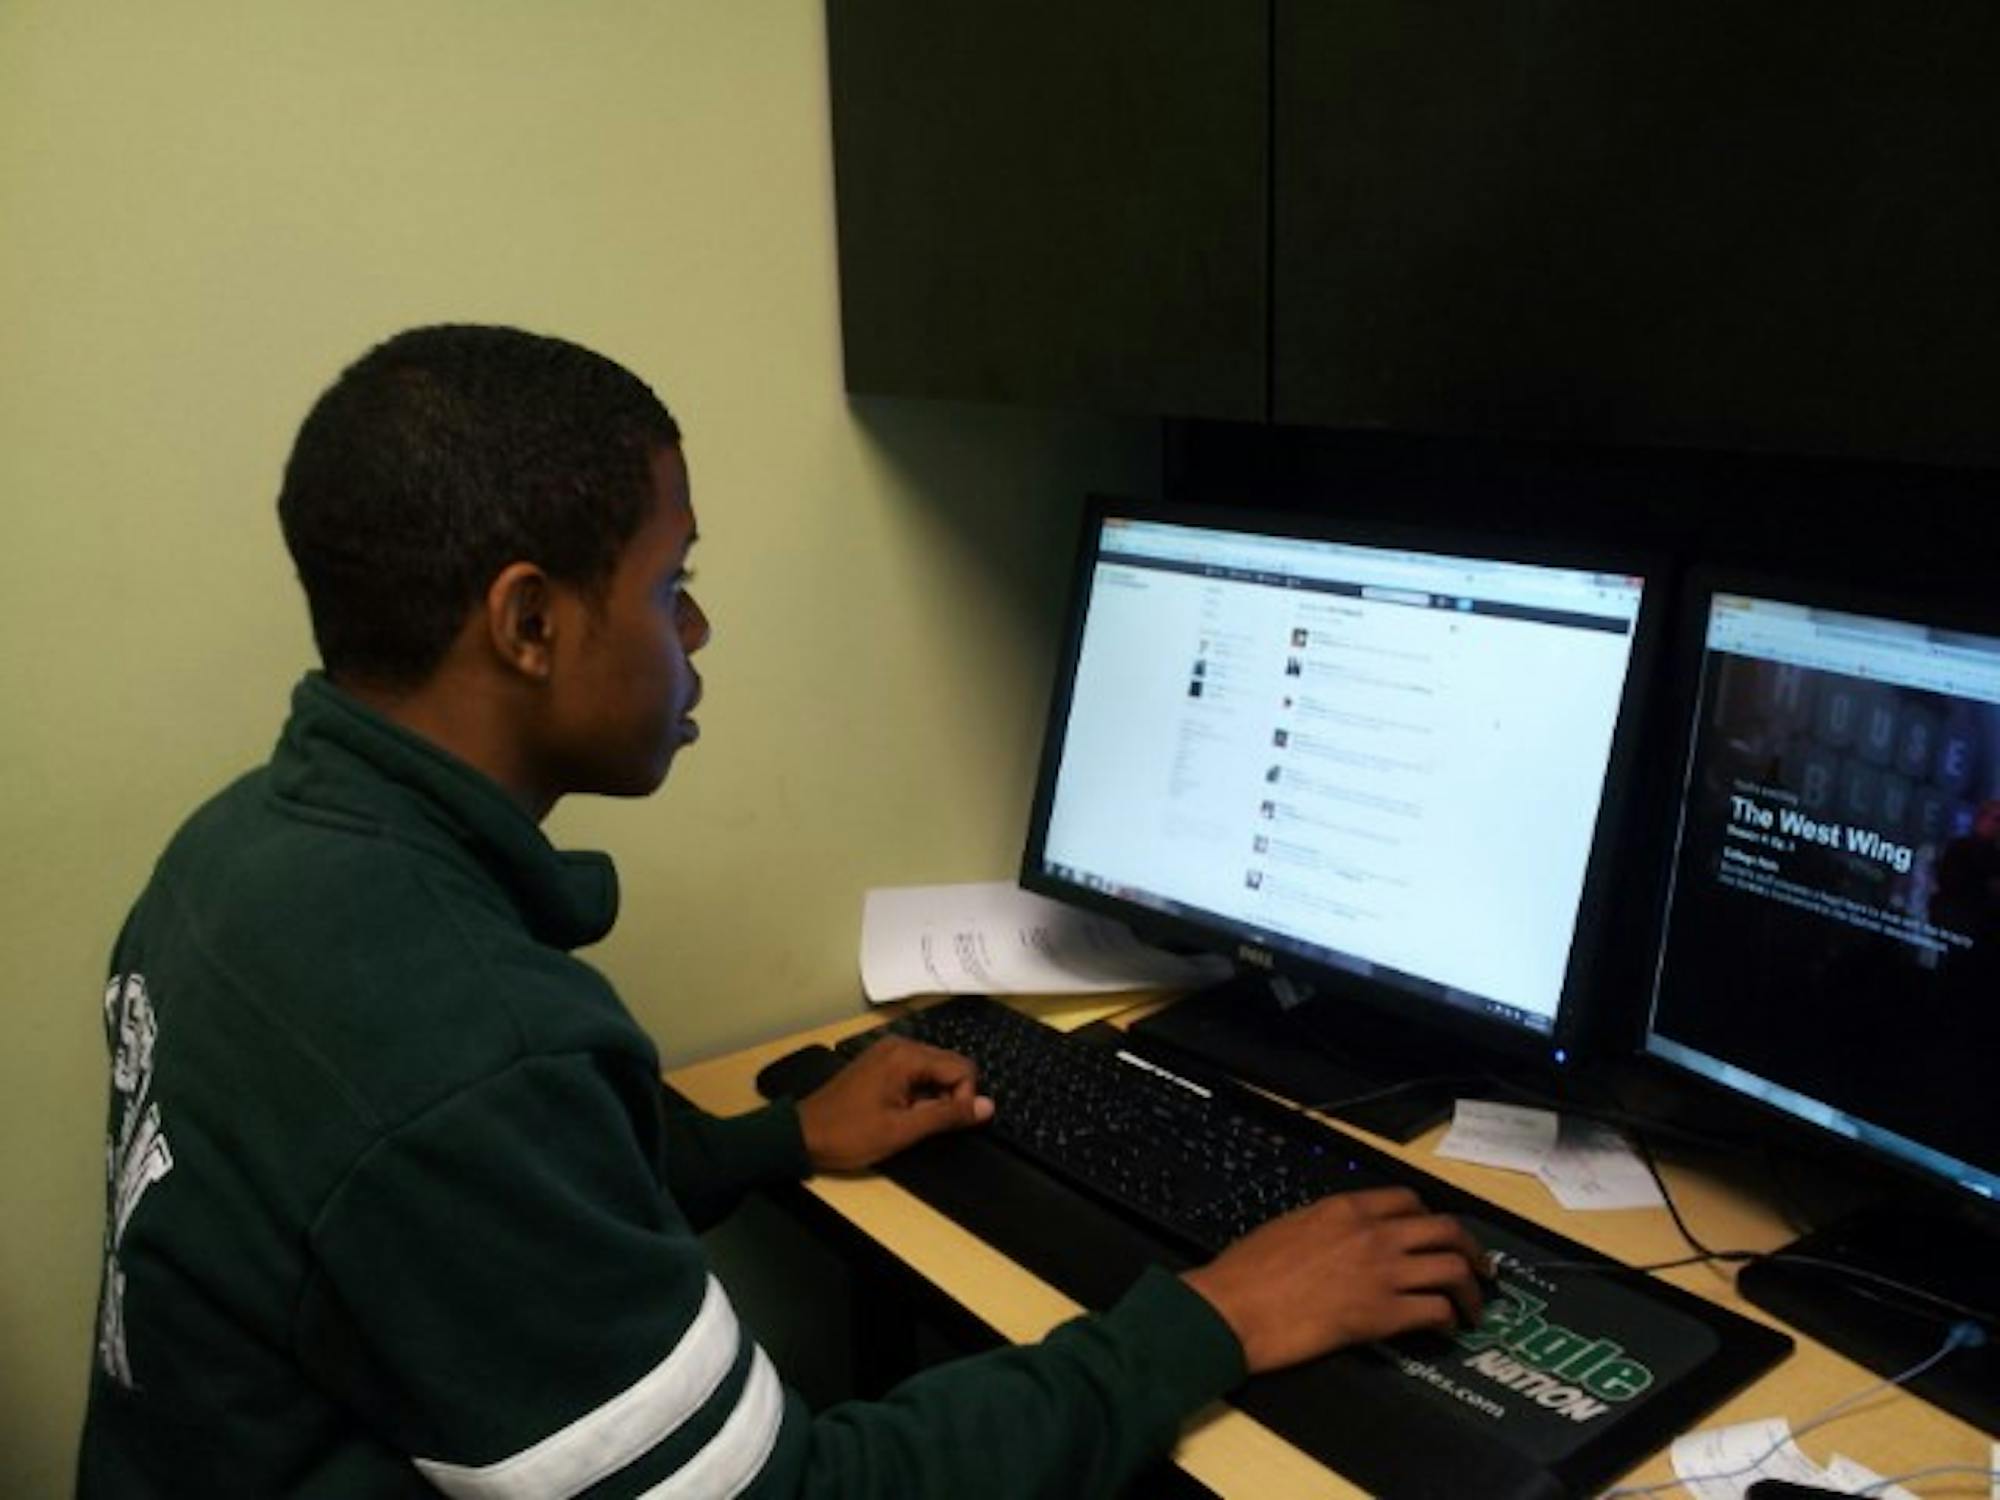 	EMU Student Government President Desmond Miller checks the Student Government Twitter feed.